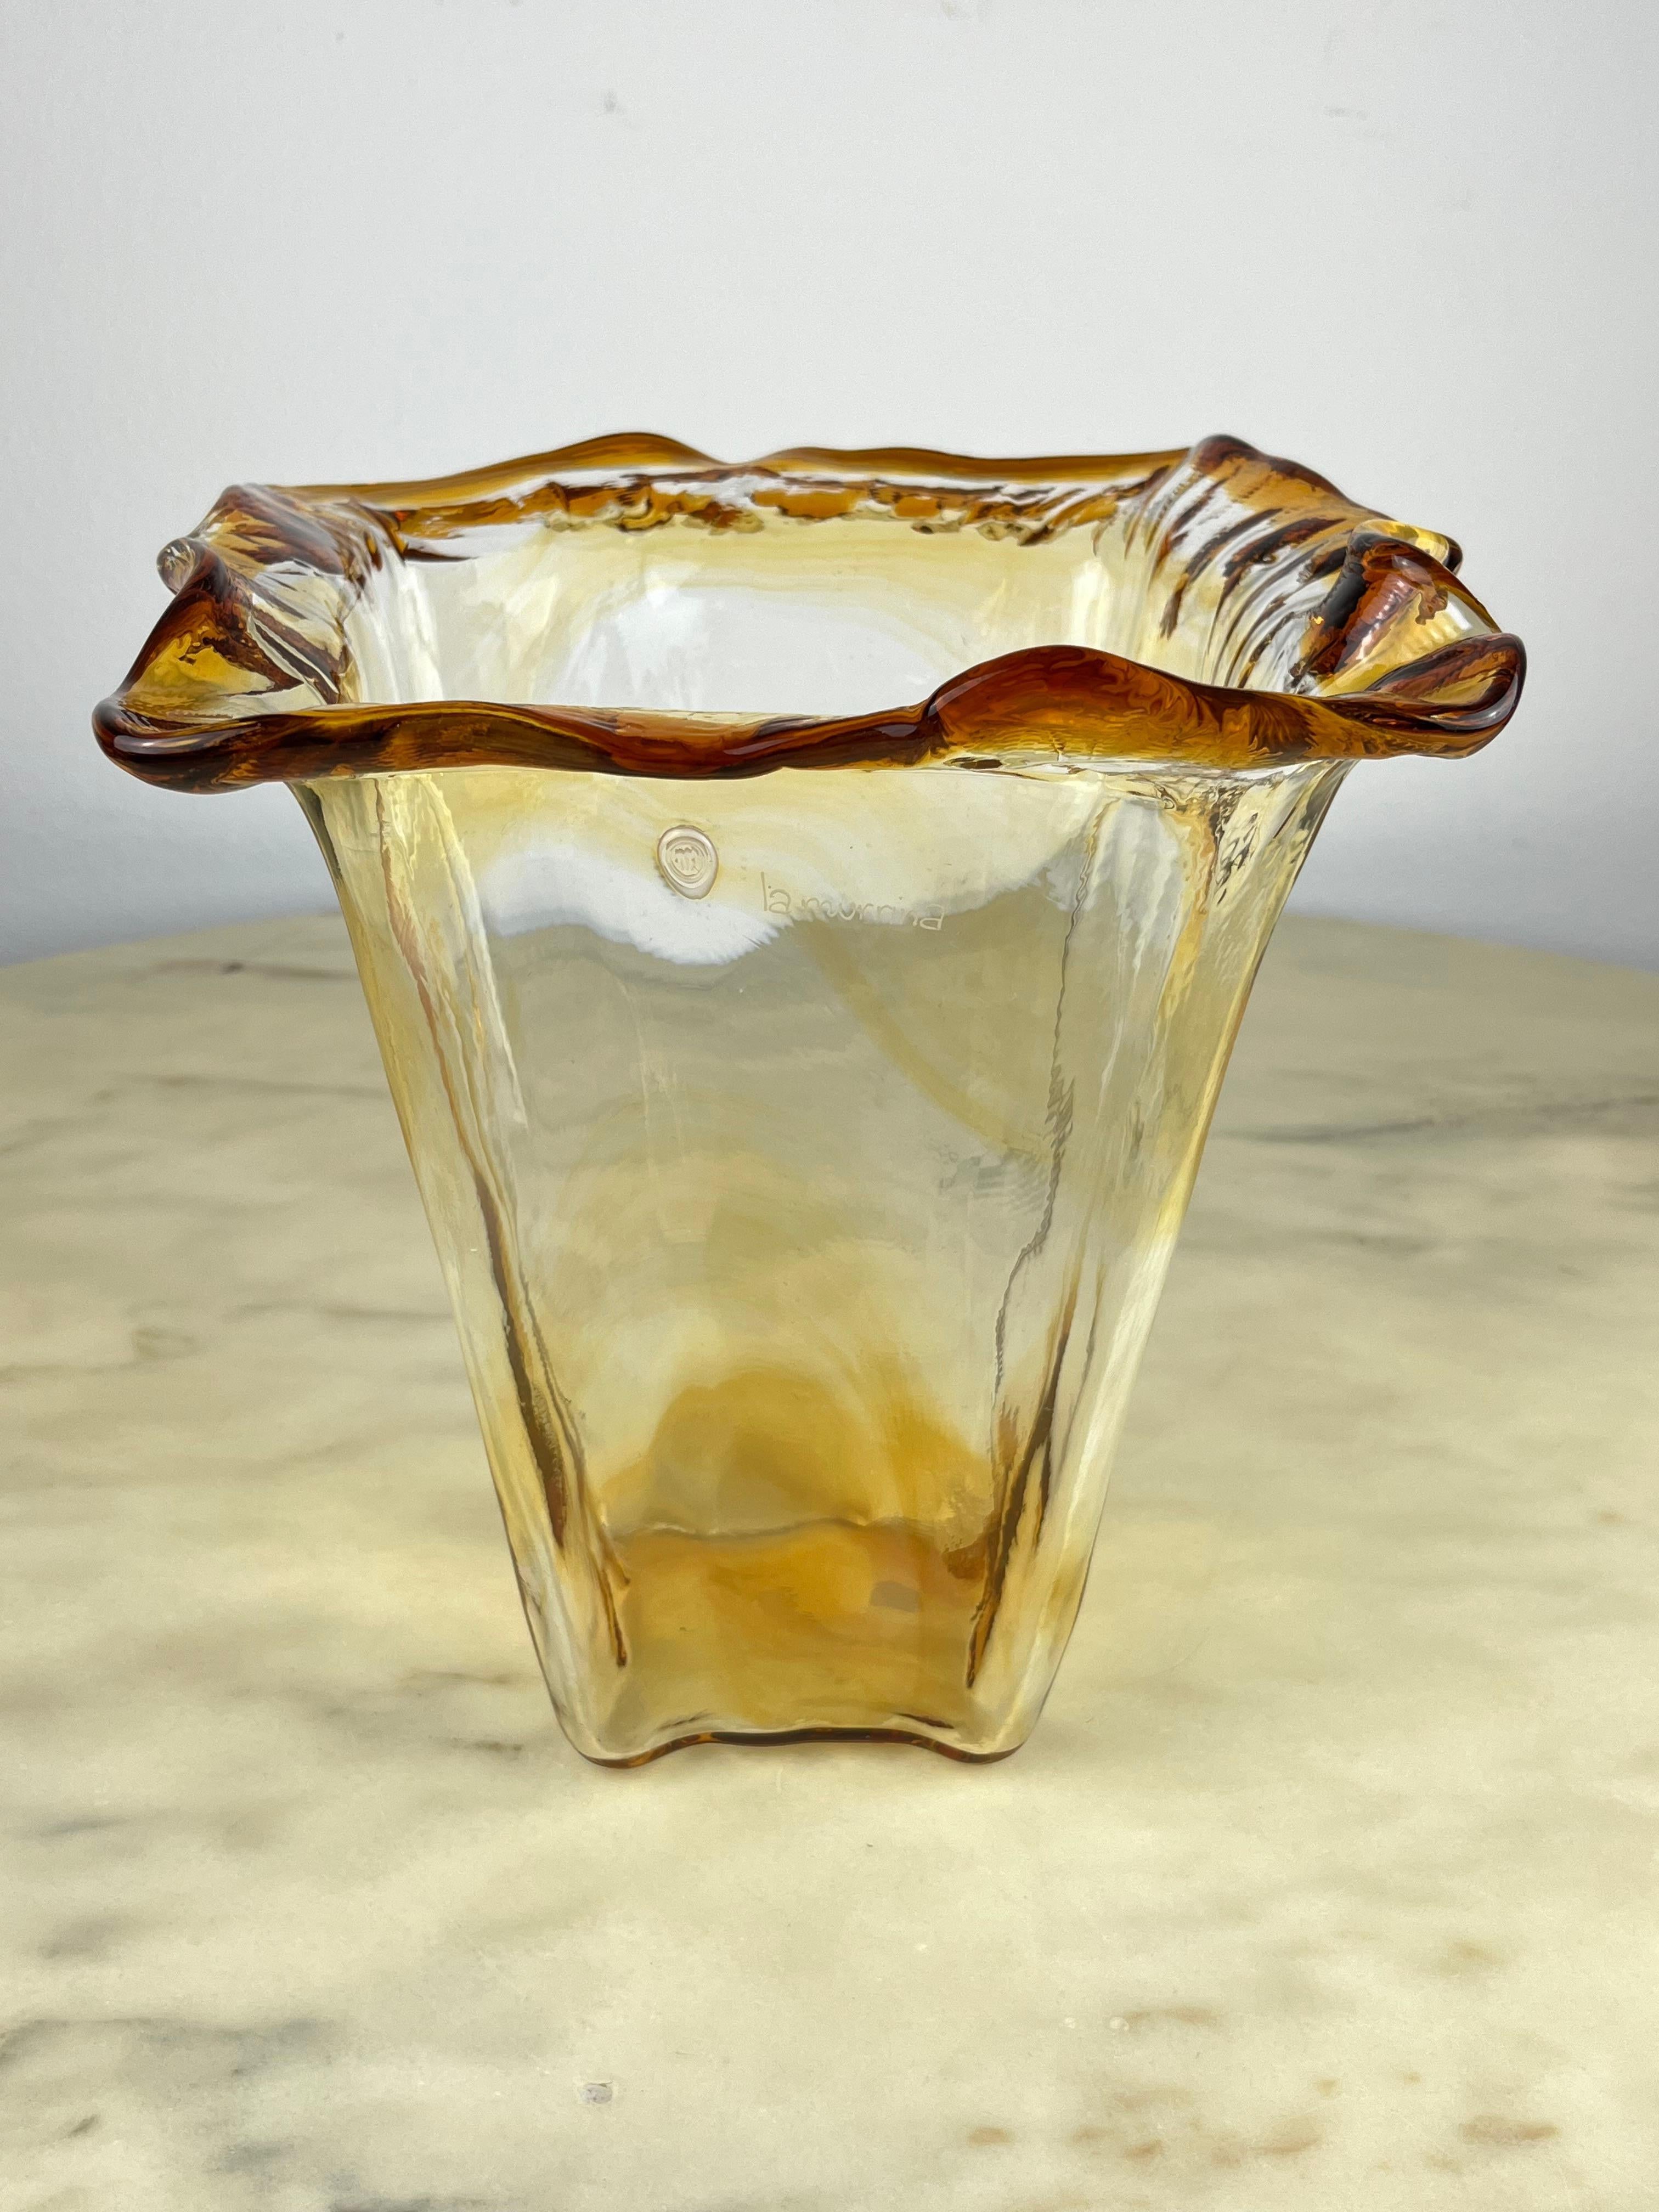 Vintage Murano glass vase, La Murrina, Italy, 1980s
Found in a noble apartment. Stamped and engraved 